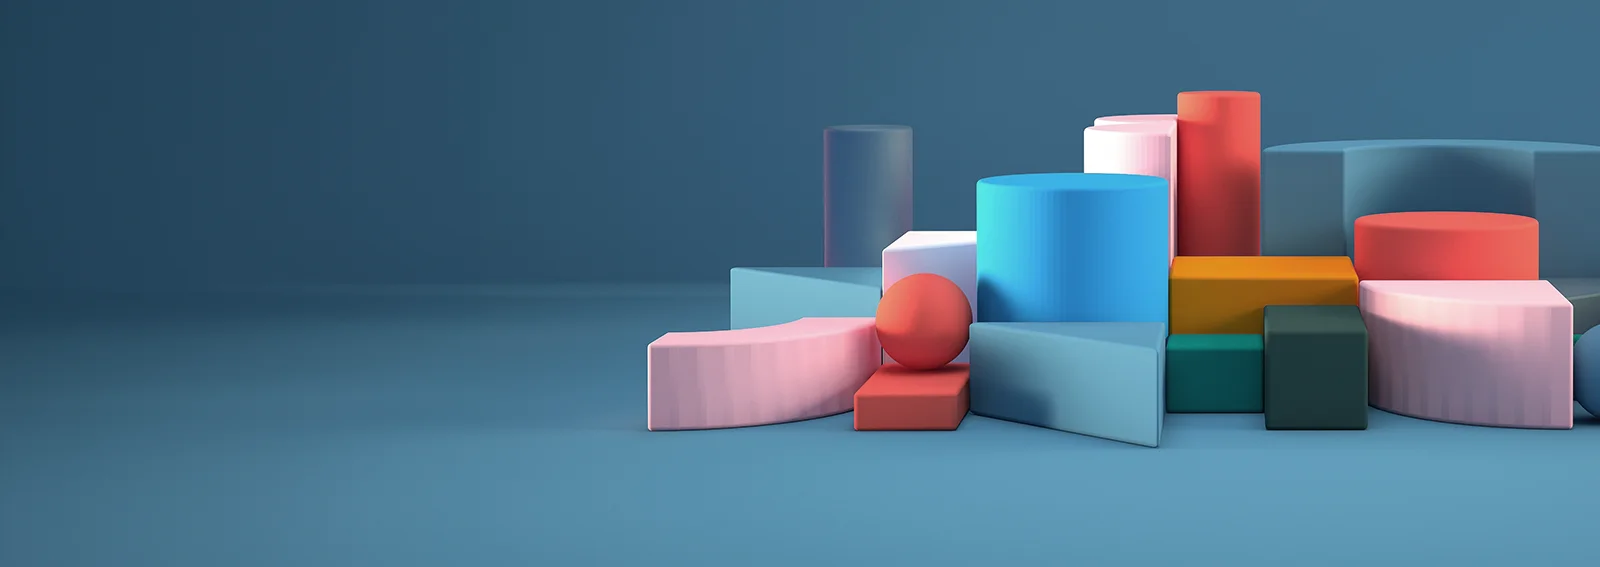 rendering of abstract colorful shapes